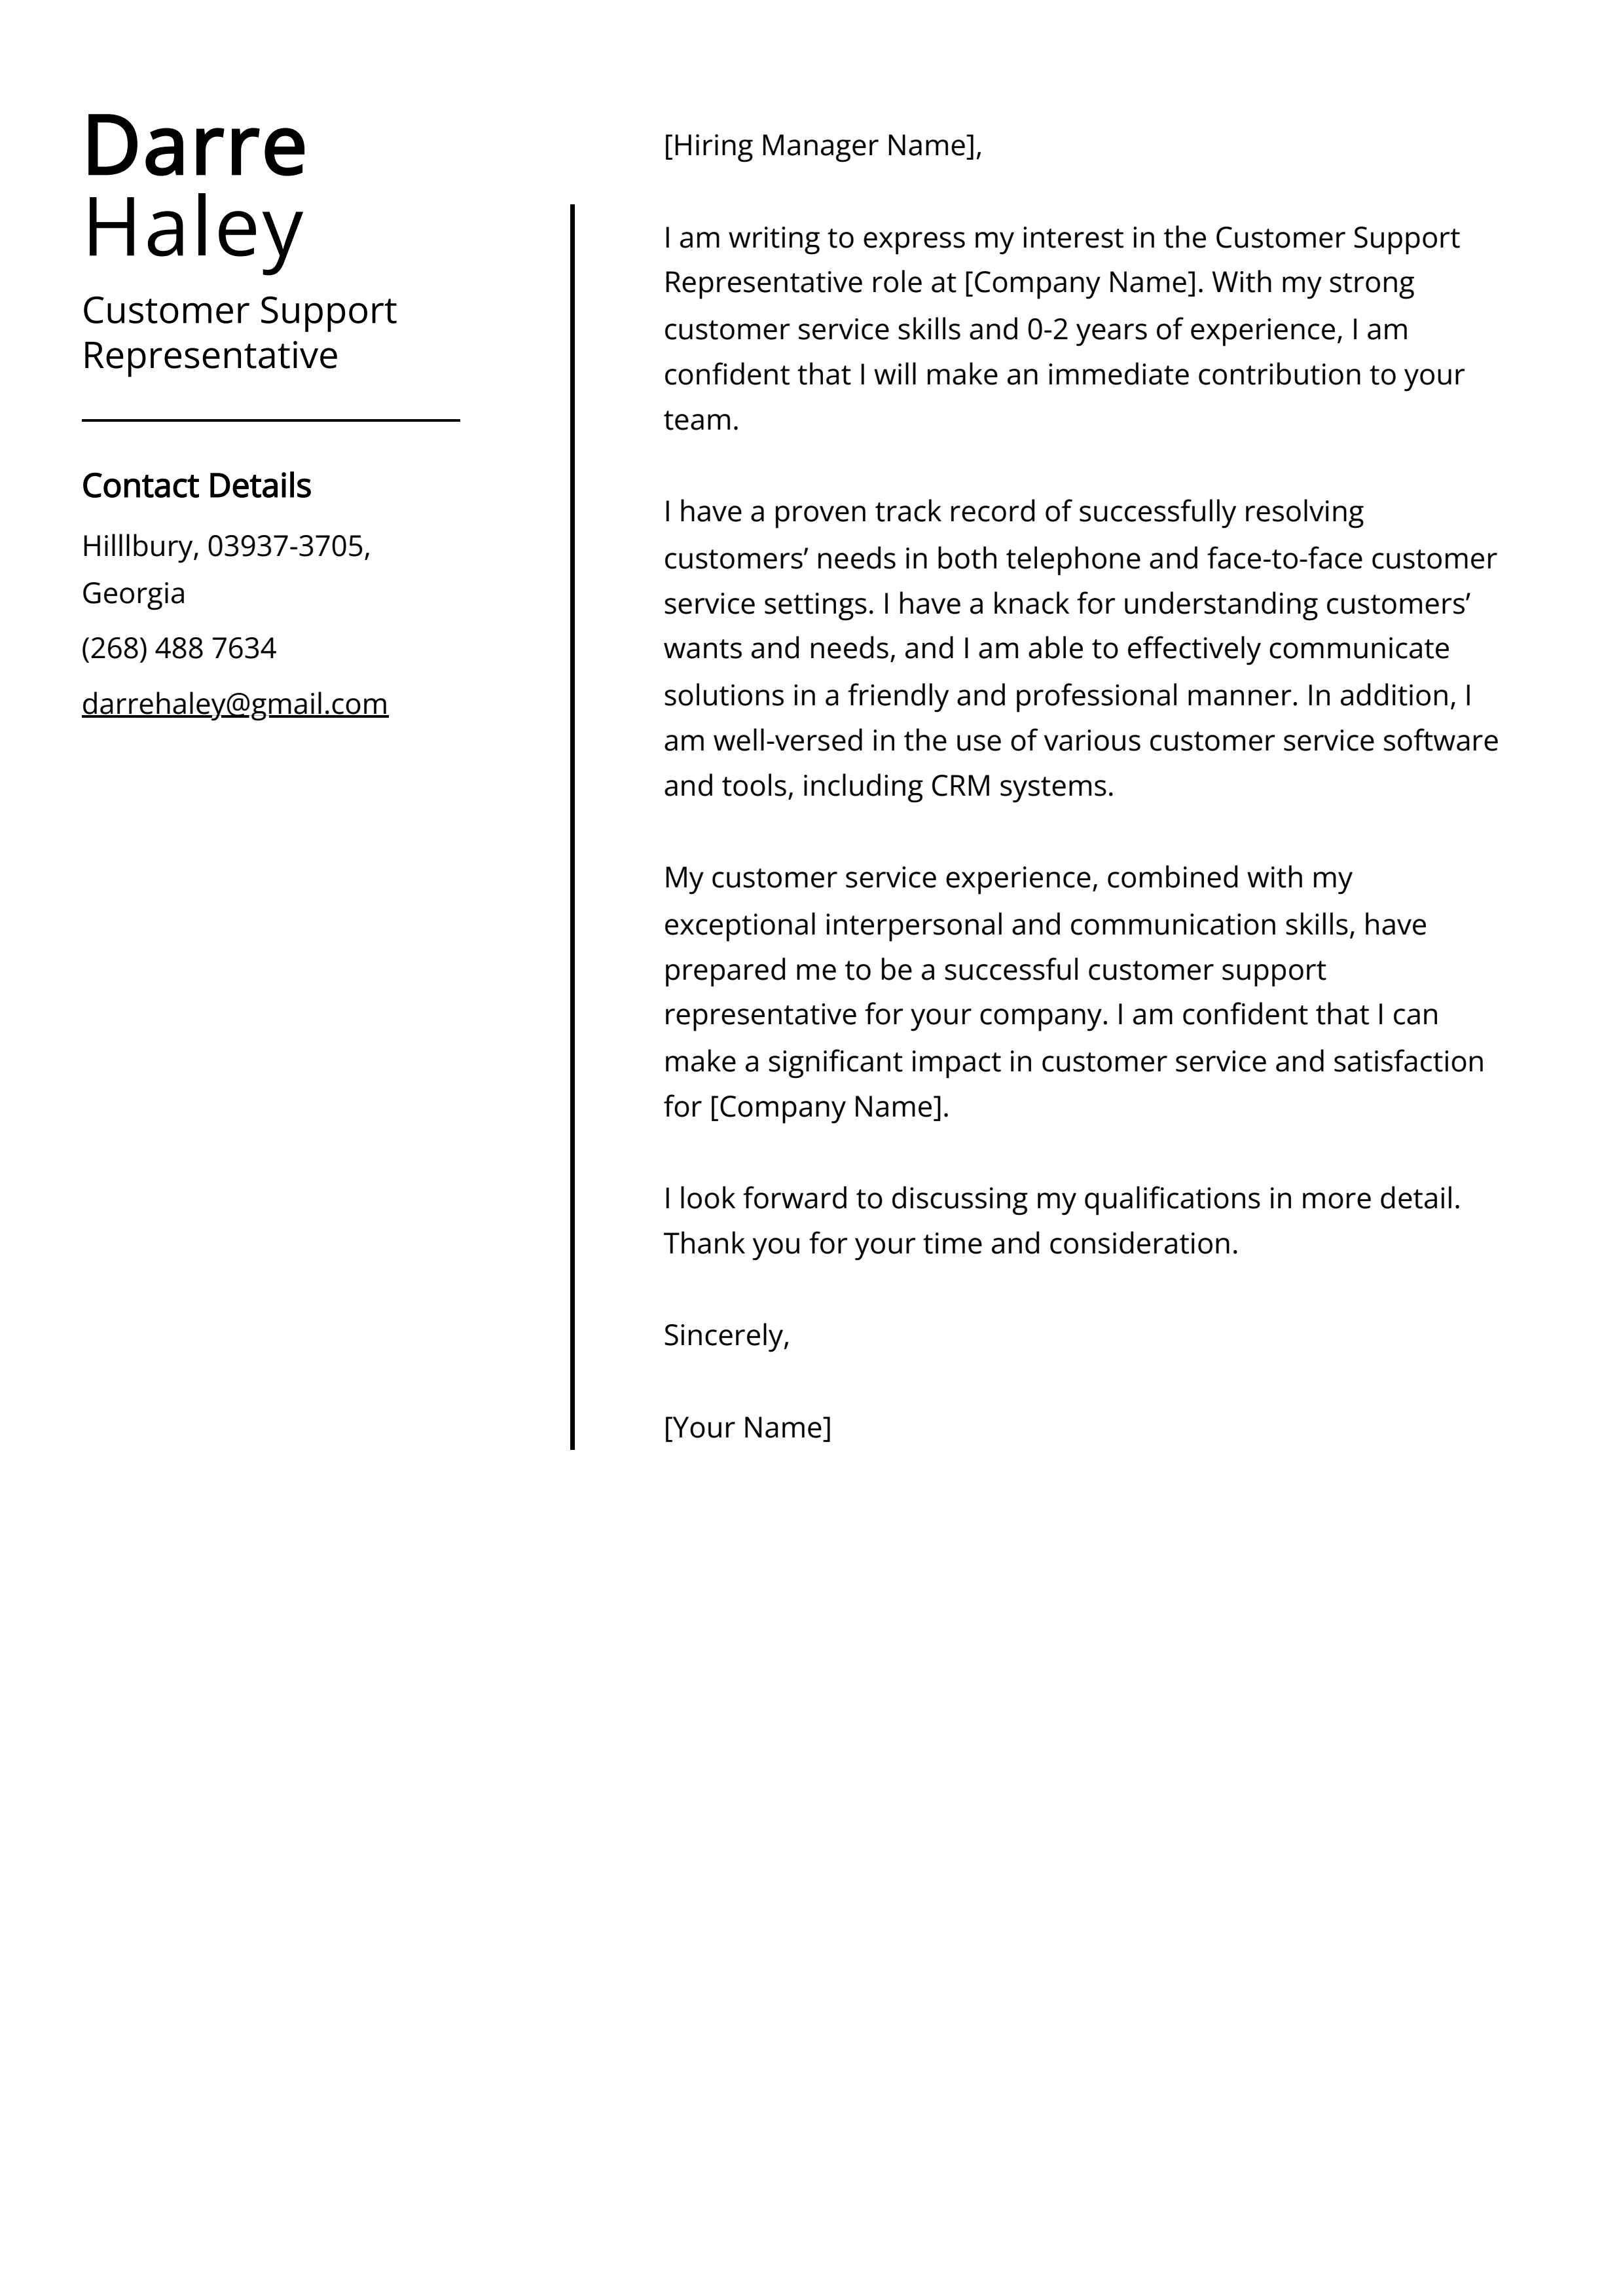 Customer Support Representative Cover Letter Example